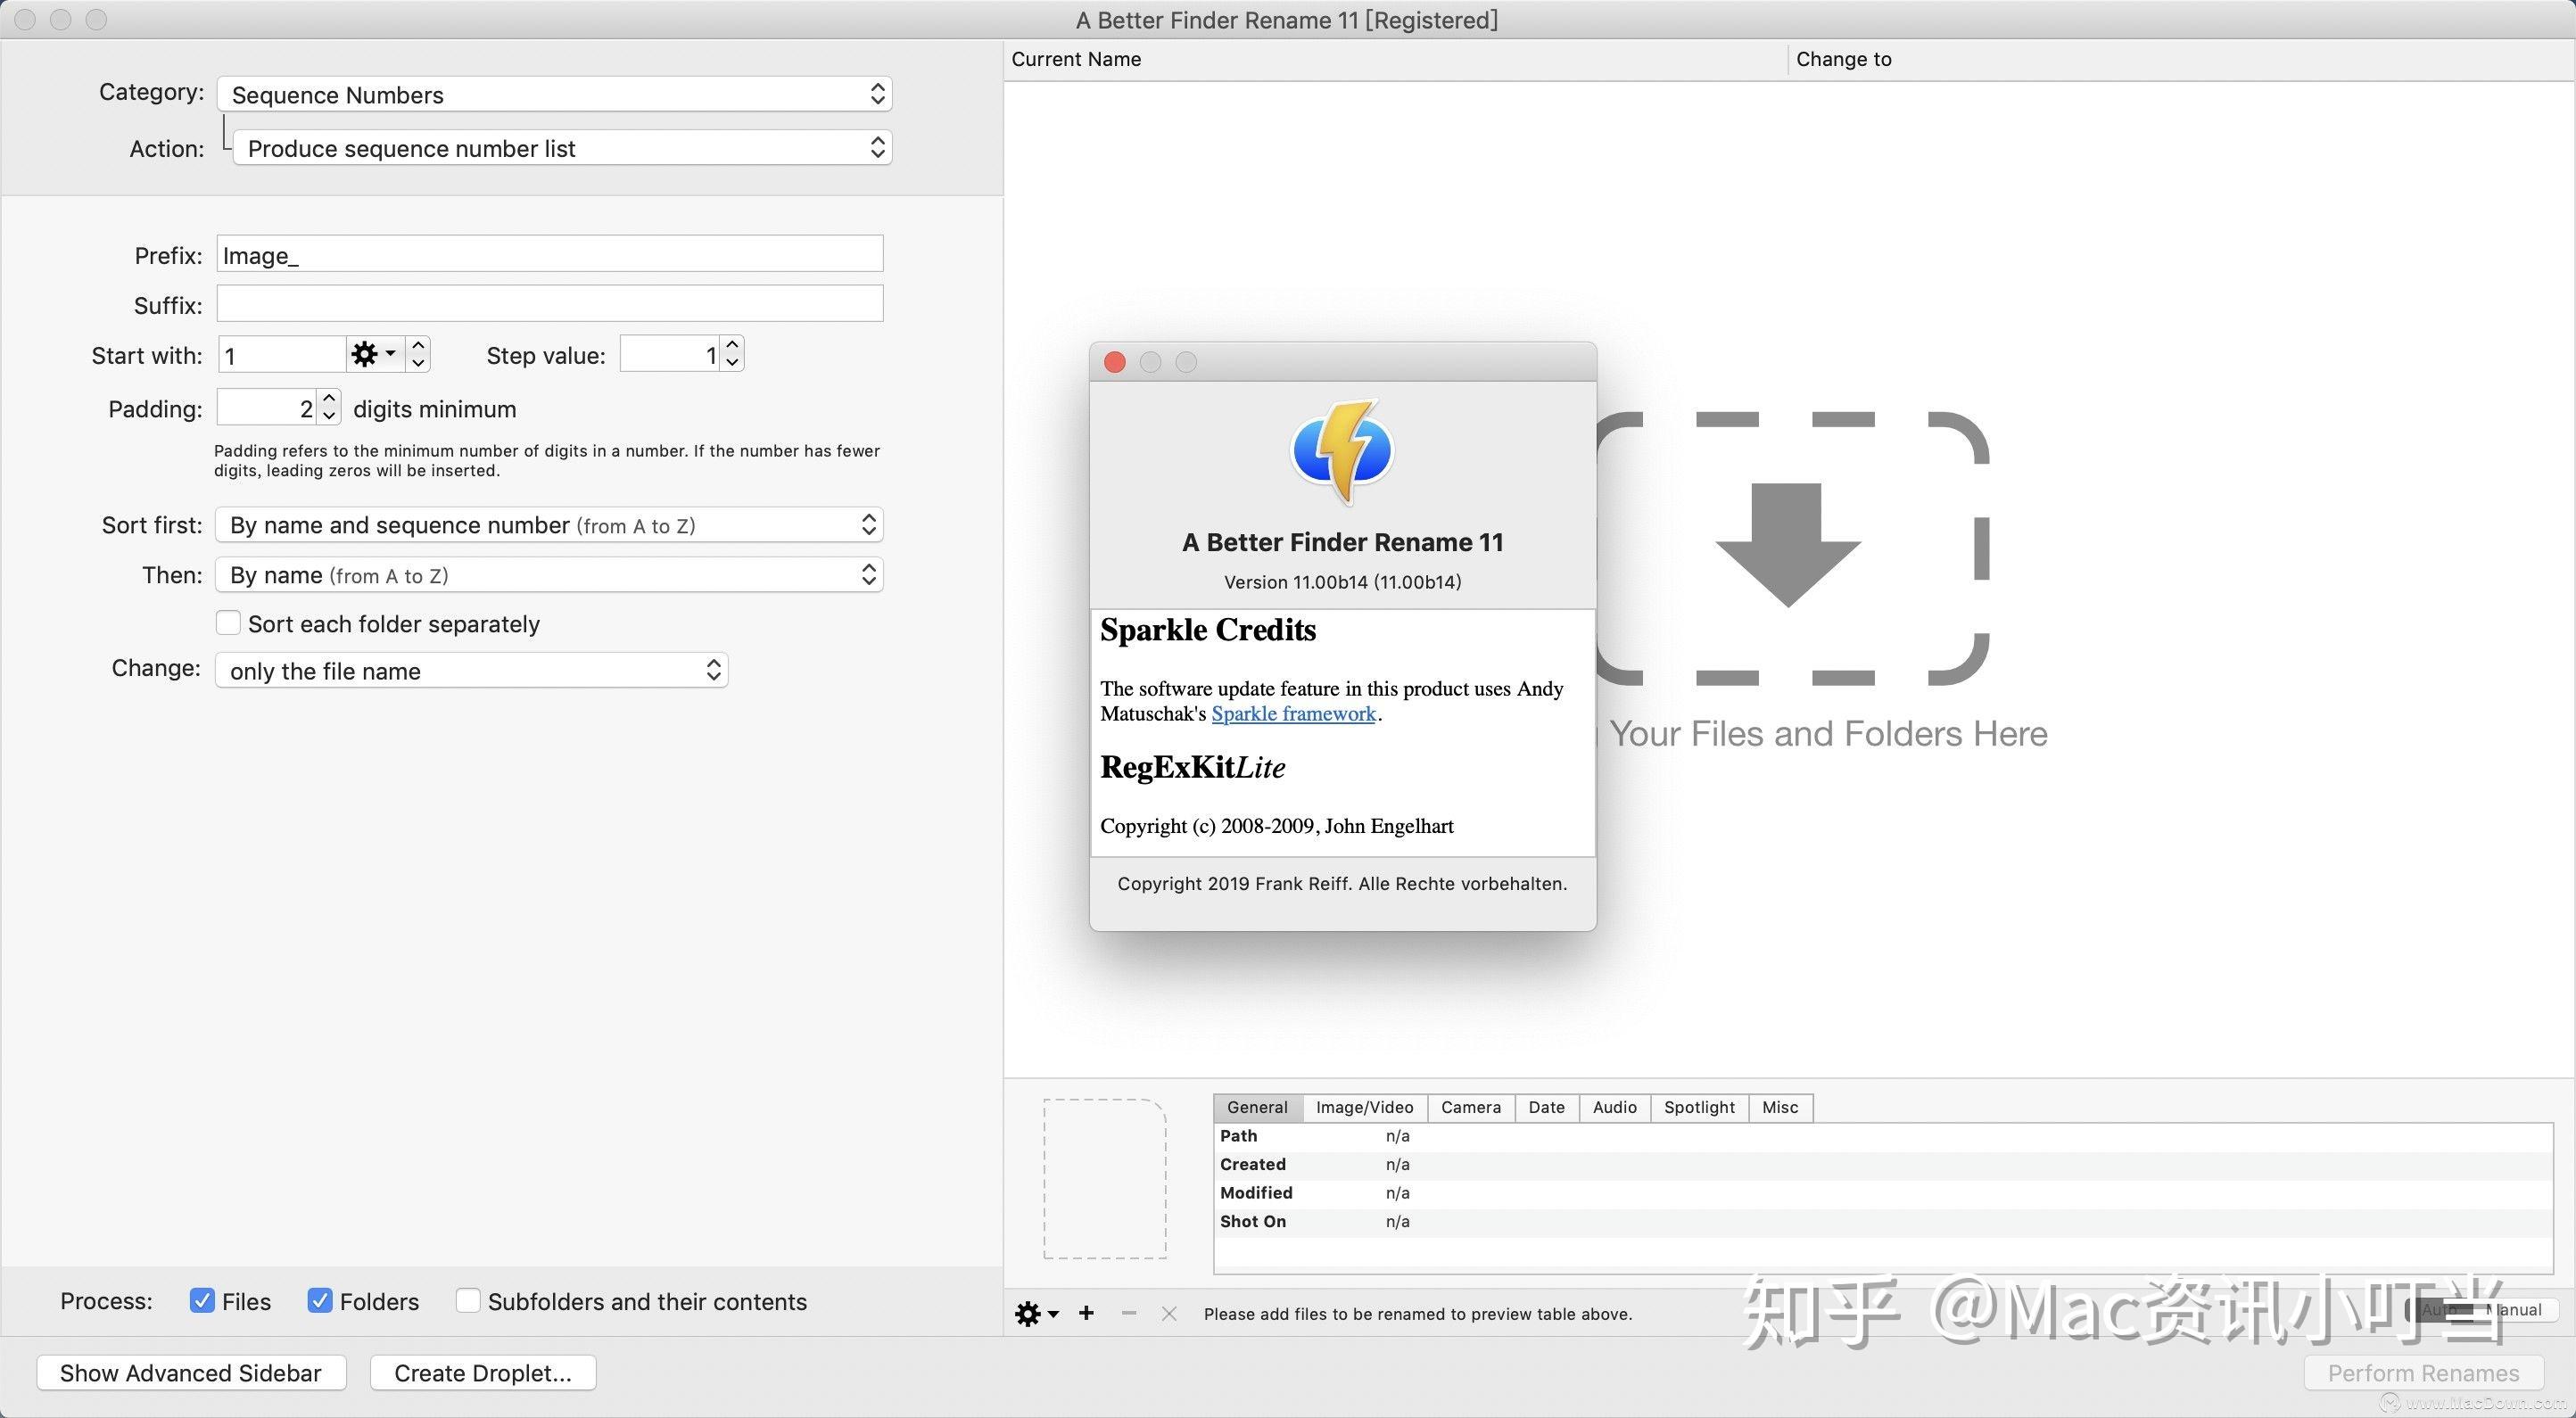 A Better Finder Rename download the new version for mac